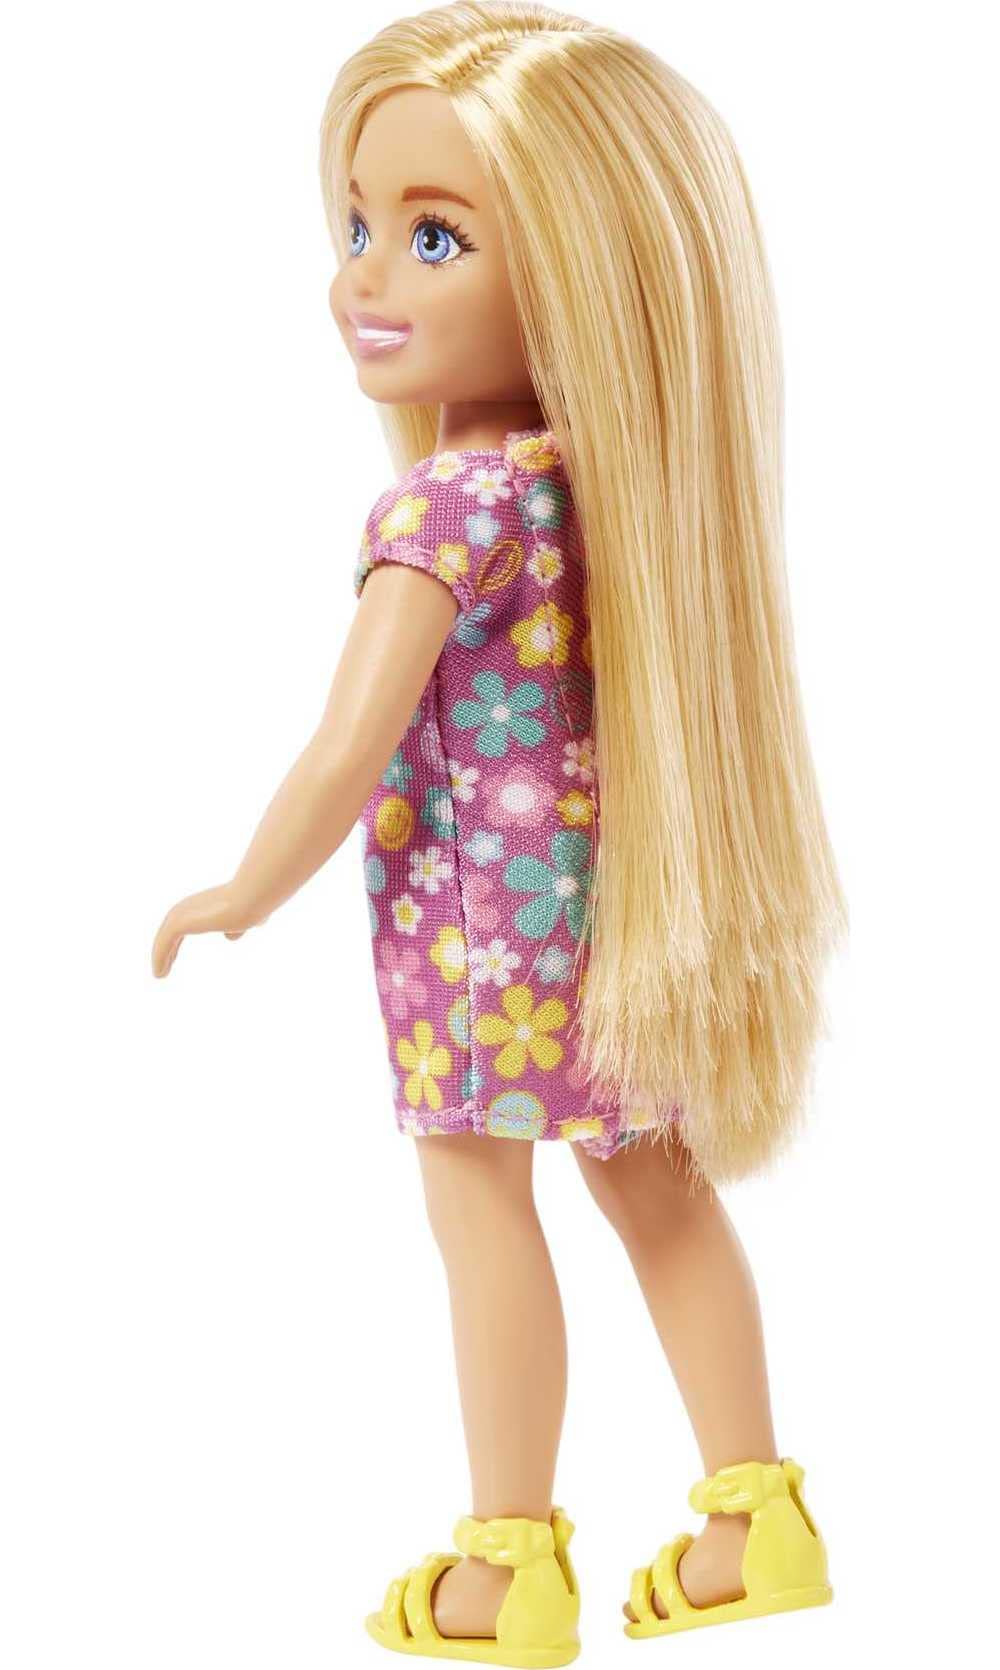 Barbie Chelsea Doll, Small Doll with Long Blonde Hair & Blue Eyes Wearing Removable Purple Flowered Dress & Yellow Shoes